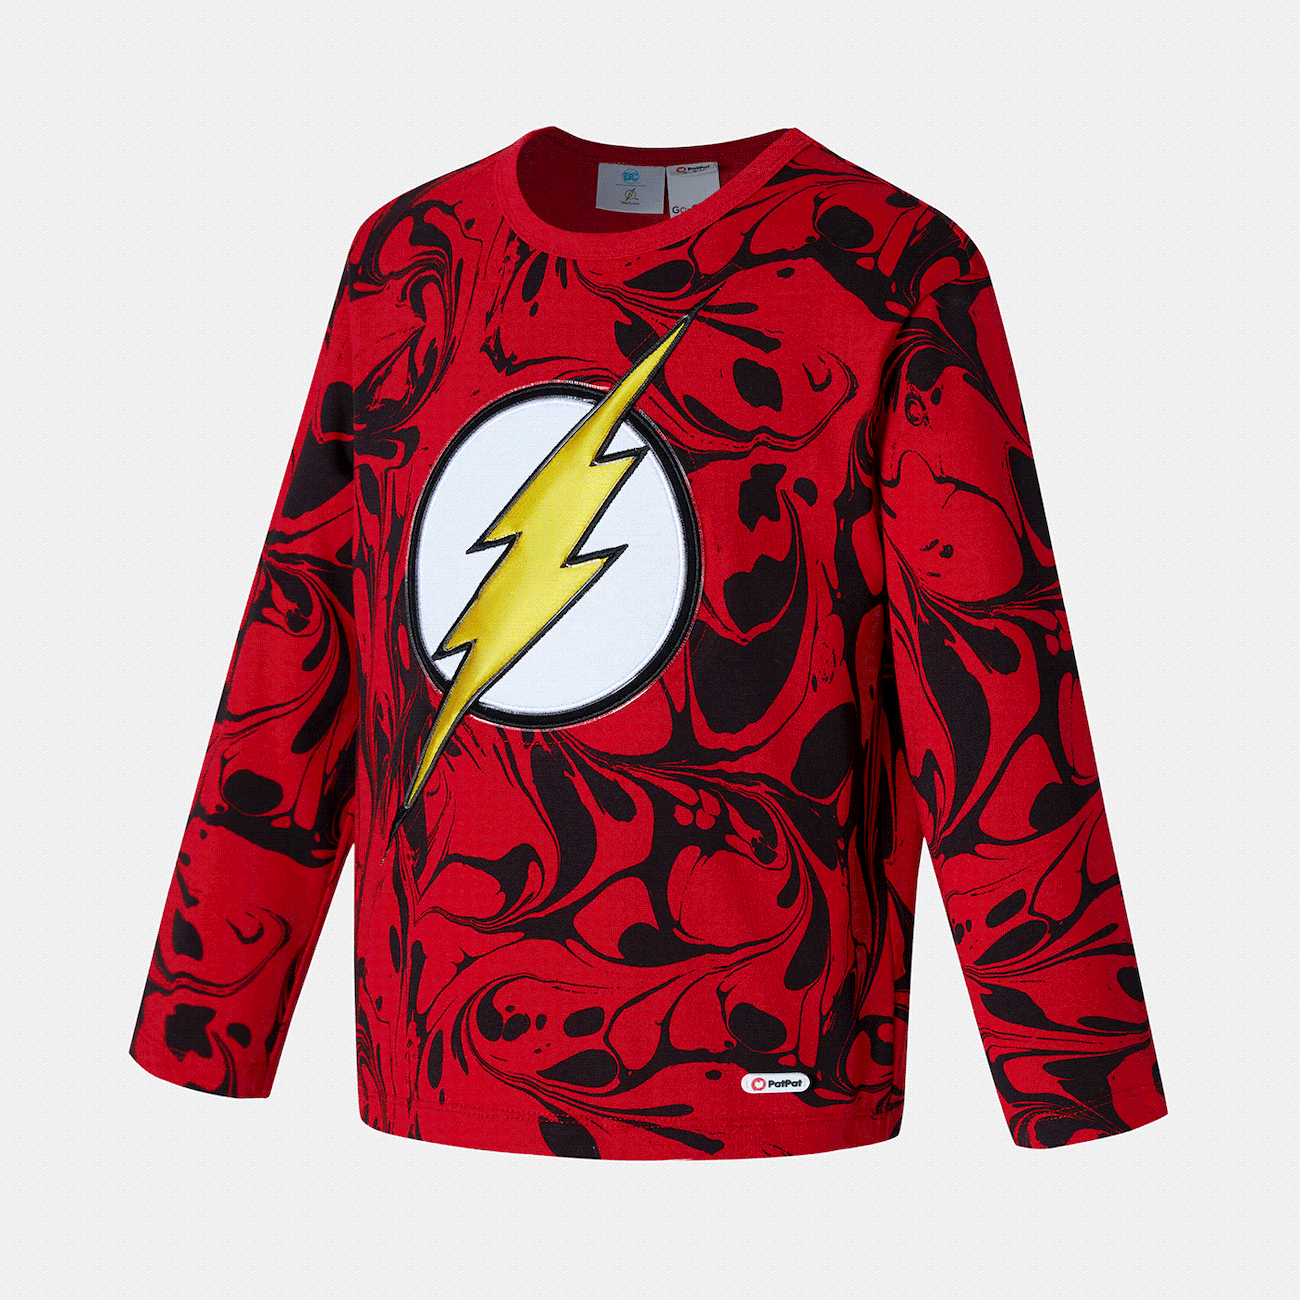 Go-Glow Leuchtend Rotes Sweatshirt mit Light Up The Flash-Muster rot big image 1